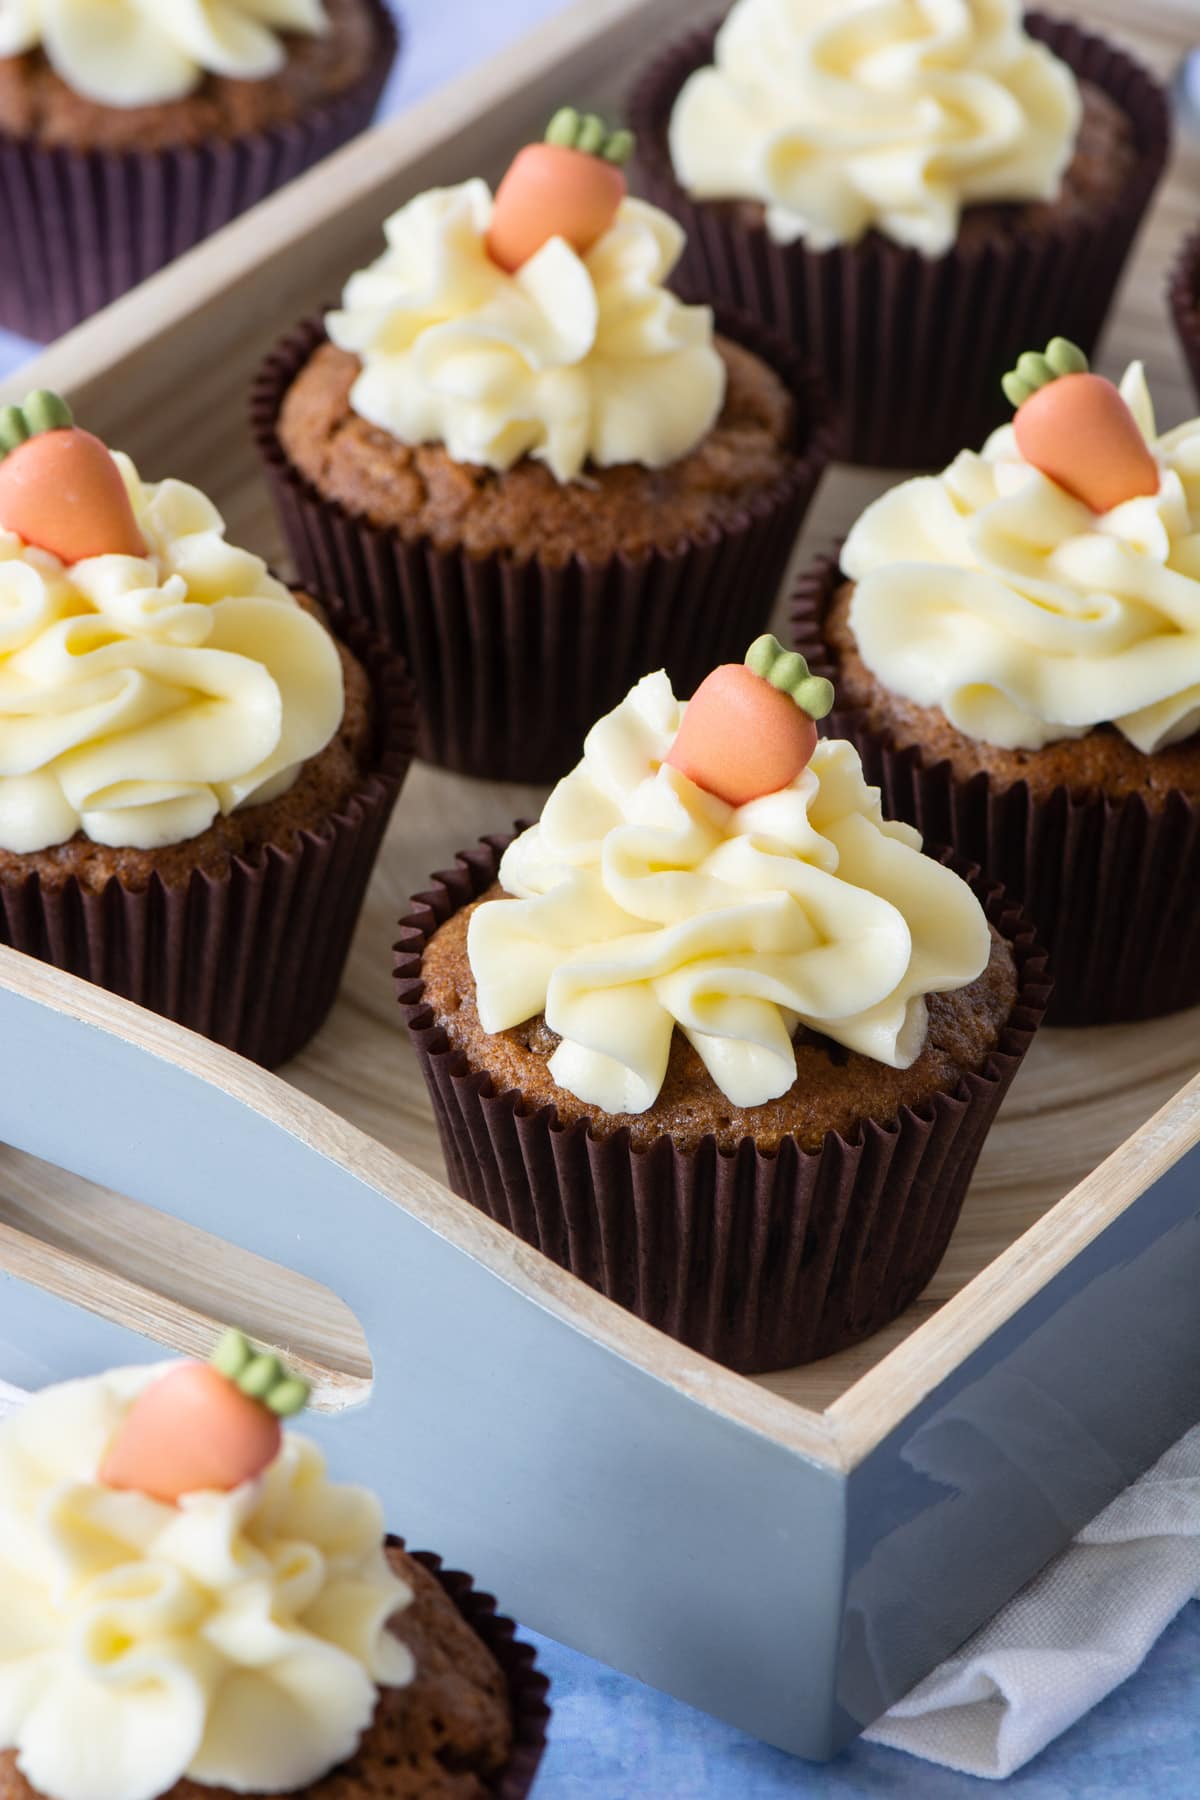 Carrot Cake Cupcakes - Delicious spiced carrot cake cupcakes topped with smooth cream cheese buttercream.